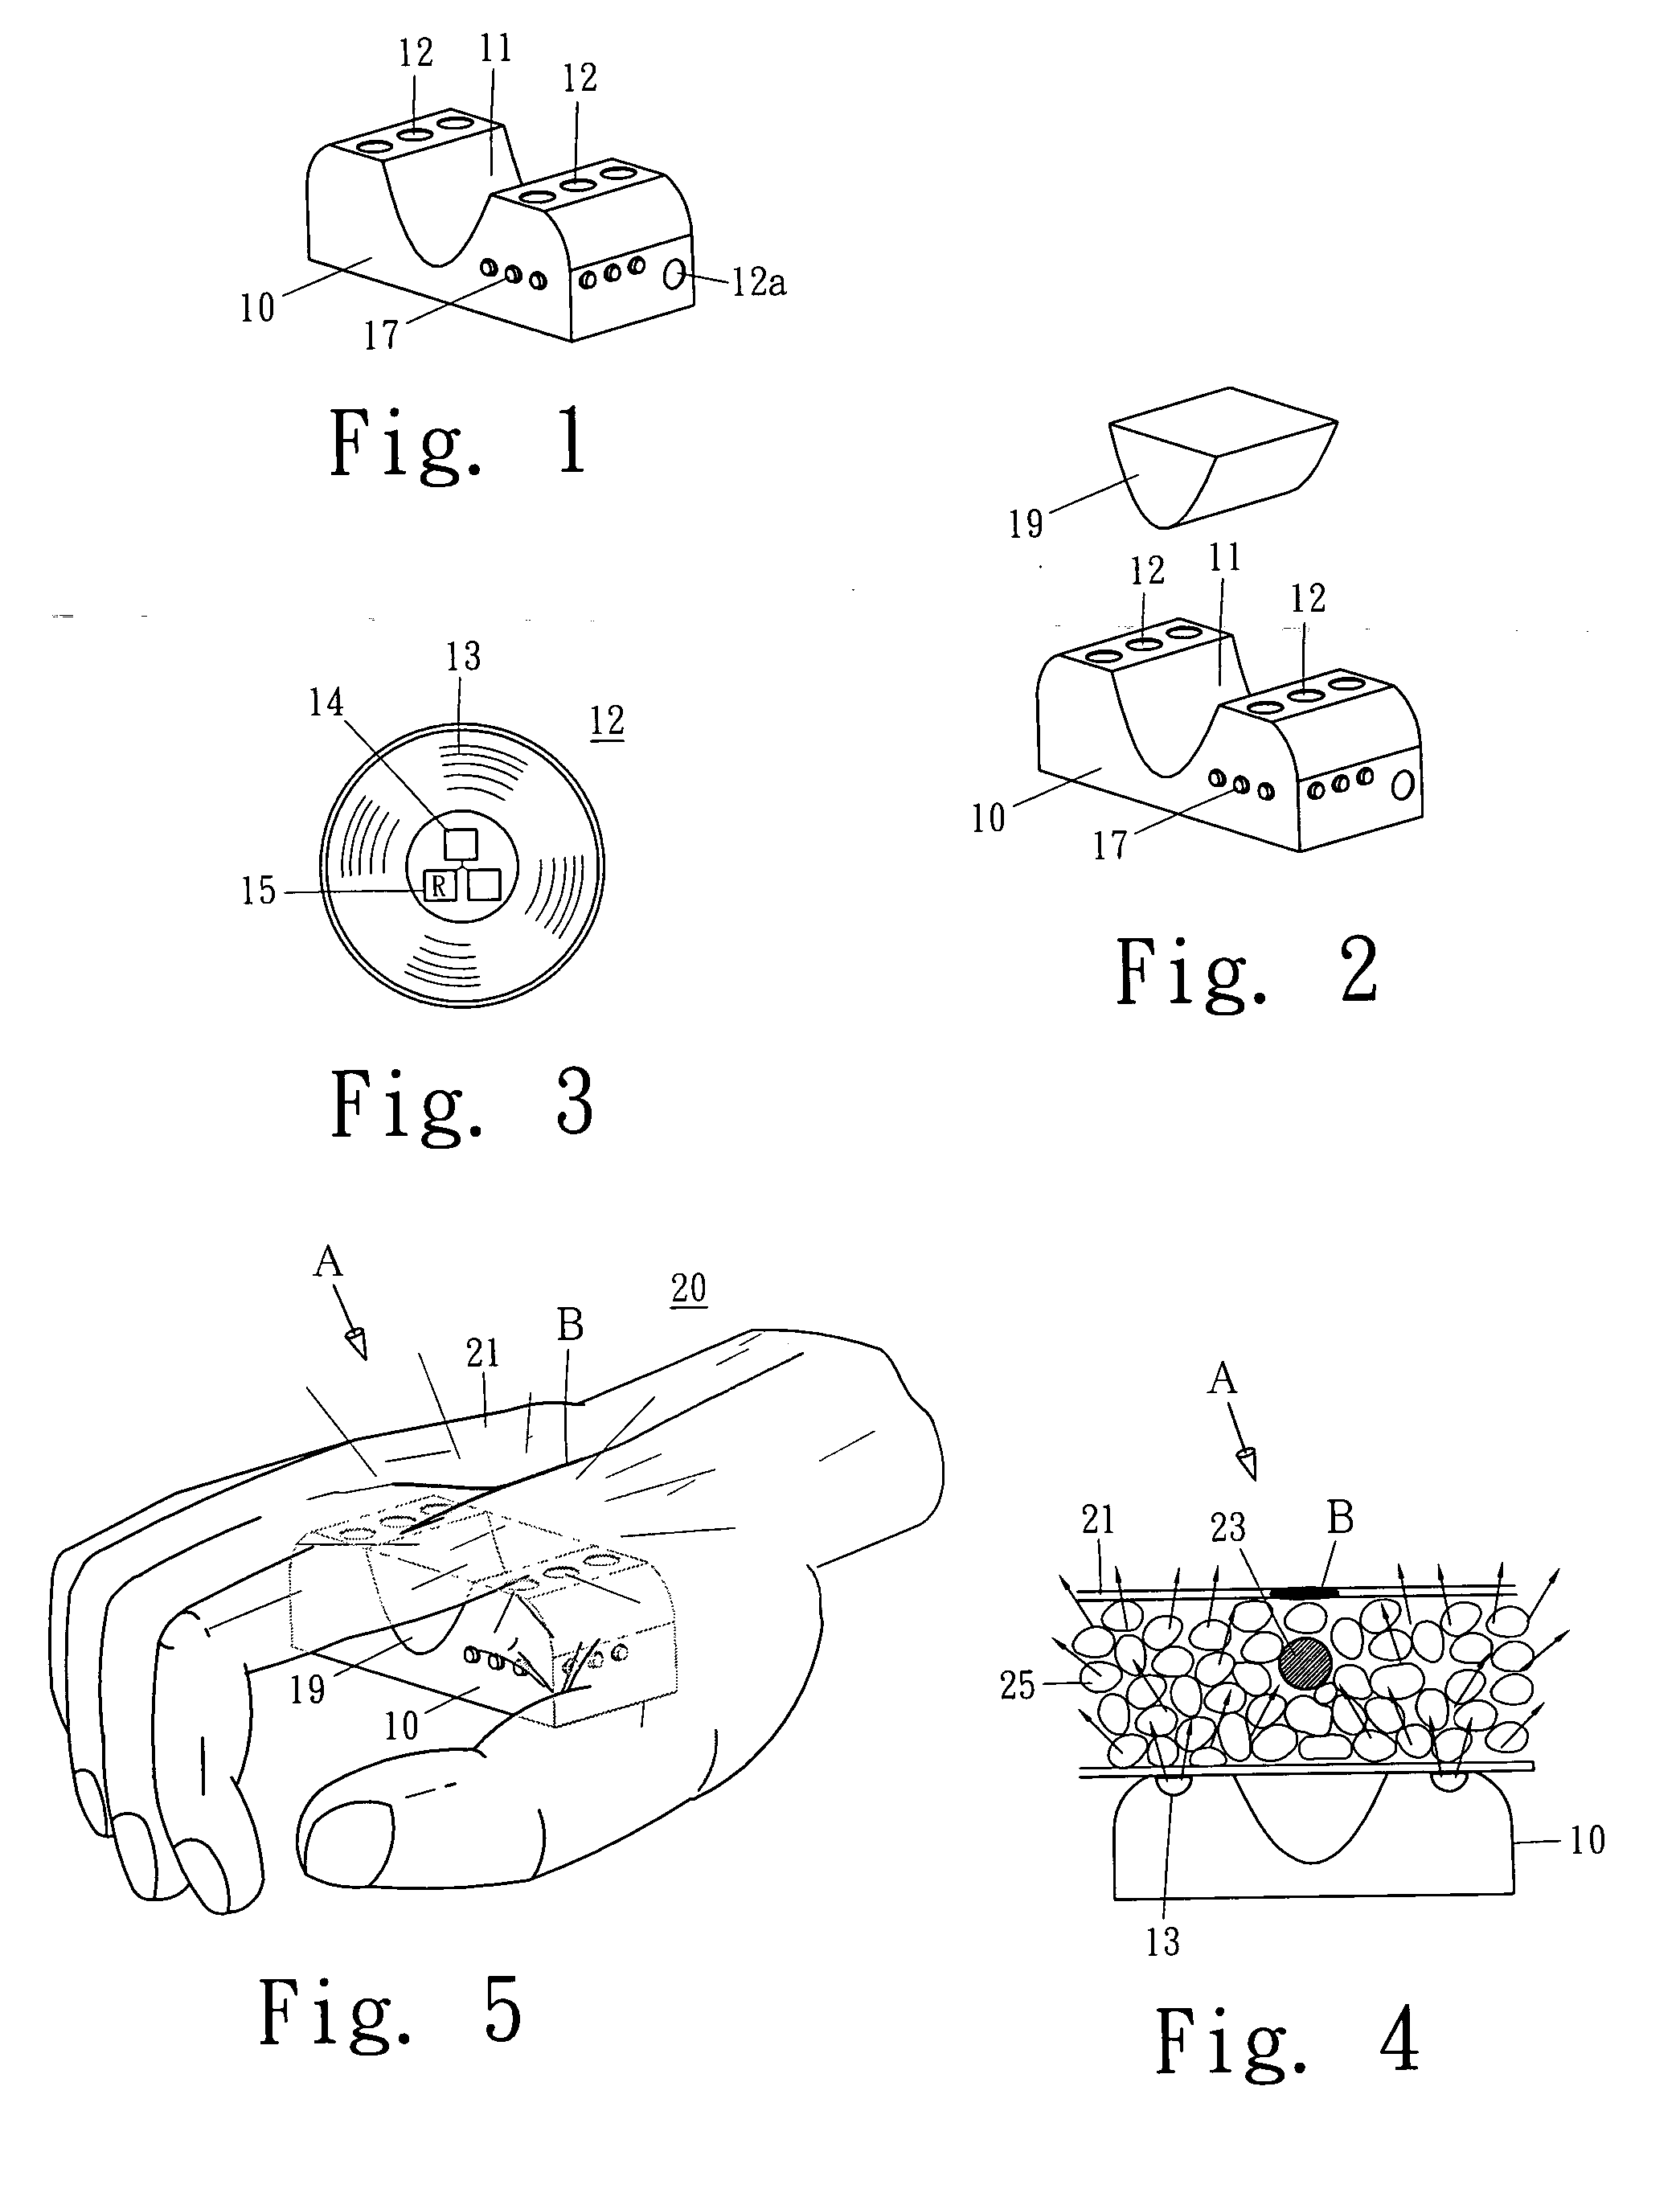 Method and apparatus for locating superficial veins or specific structures with a LED light source